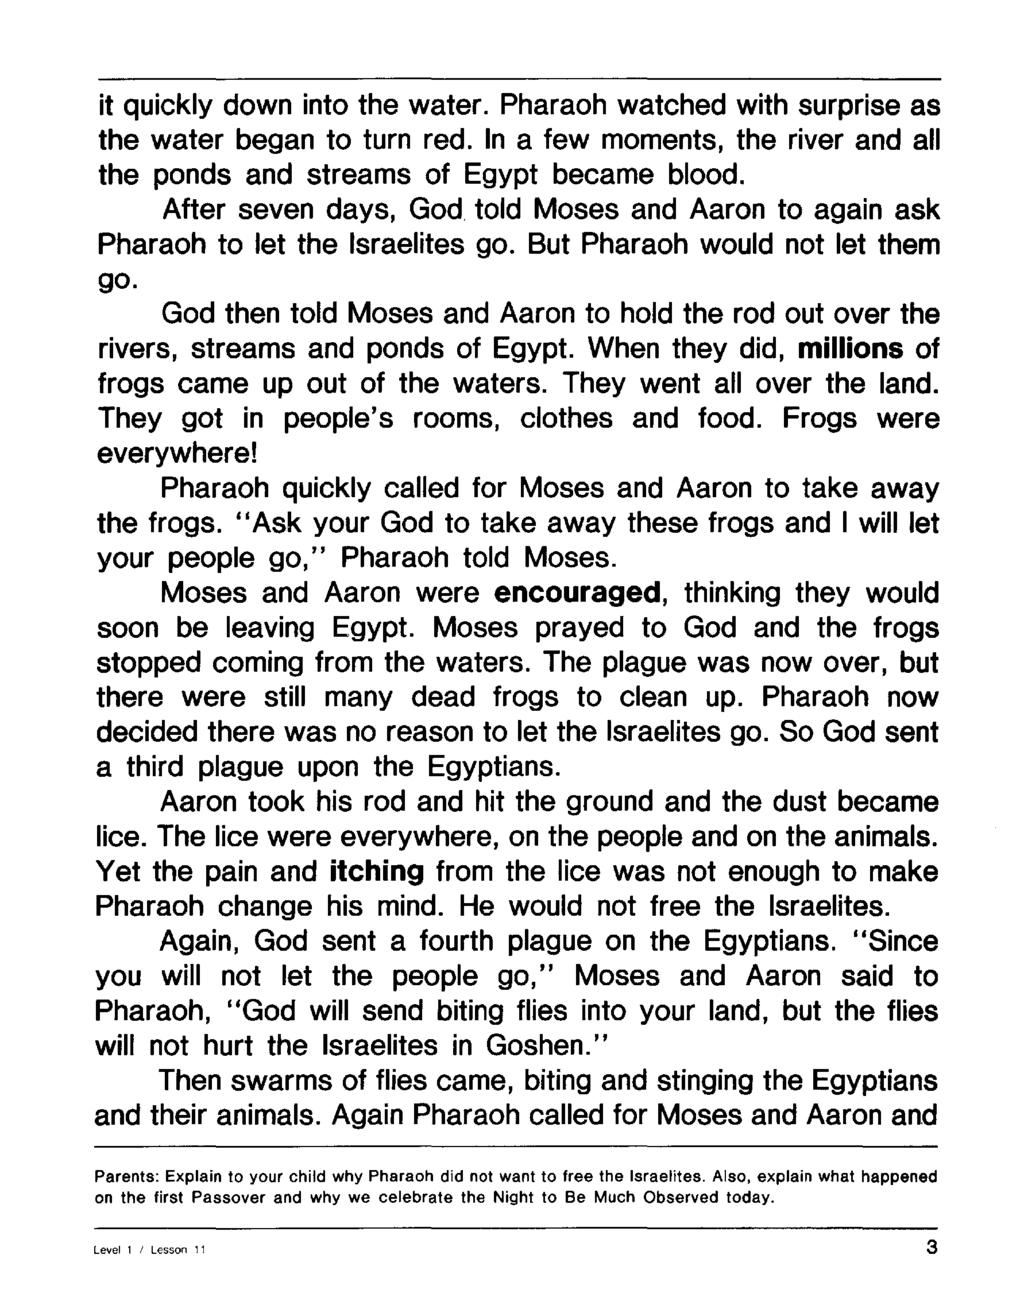 it quickly down into the water. Pharaoh watched with surprise as the water began to turn red. In a few moments, the river and all the ponds and streams of Egypt became blood.